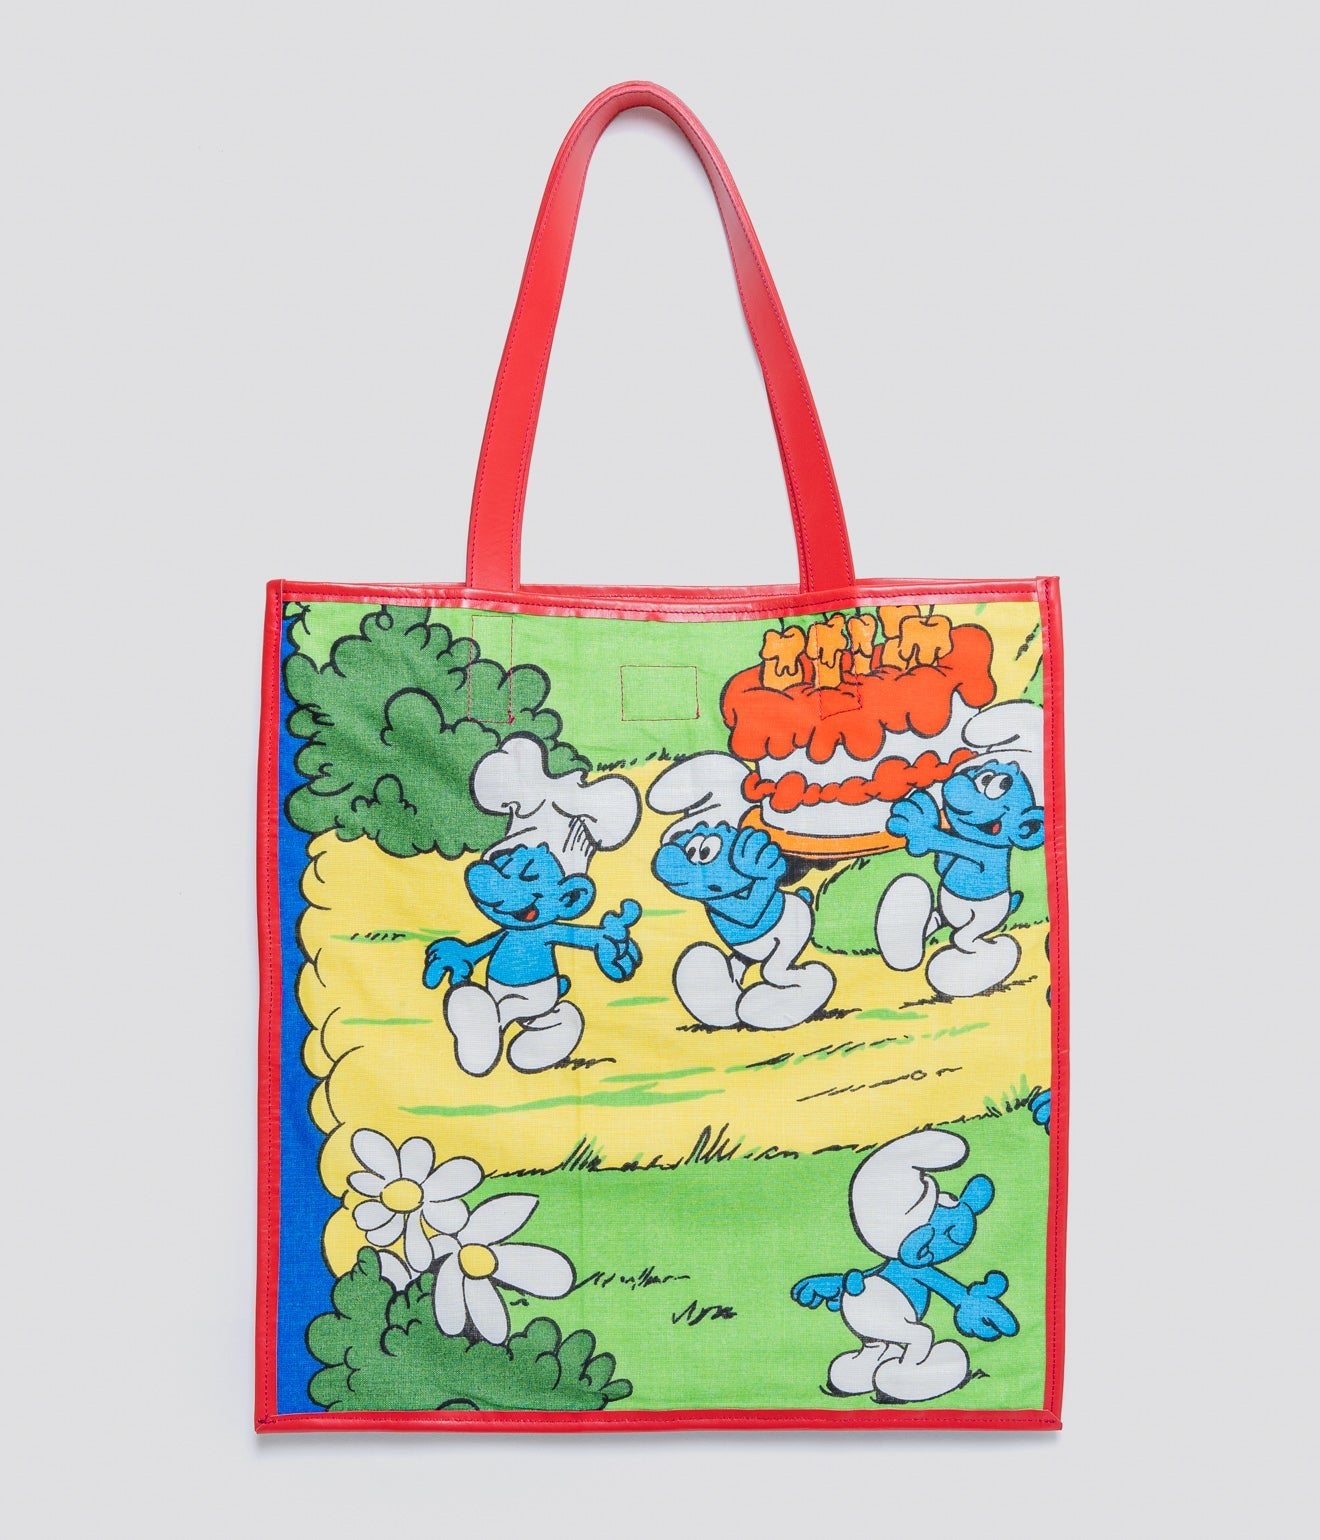 WEAREALLANIMALS UPCYCLE ”Piping Flat Tote -Vintage Smurf Fabric-" #6 - WEAREALLANIMALS